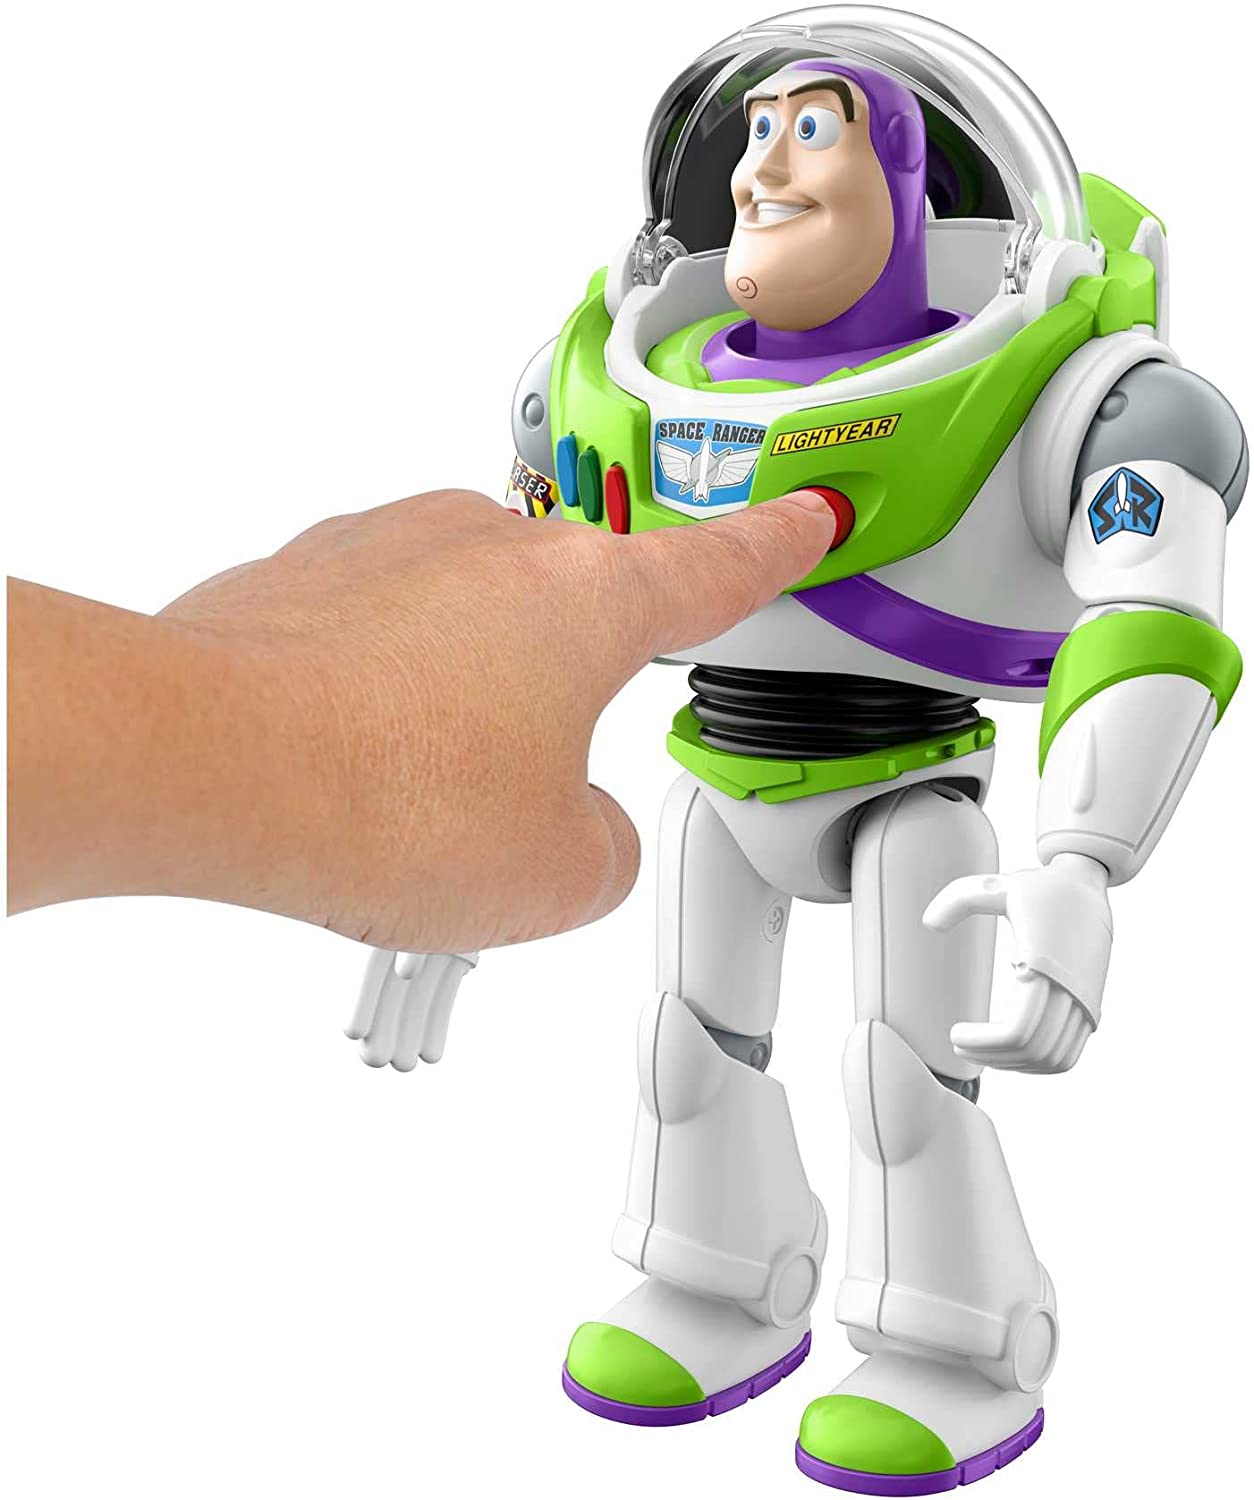 Pixar Toy Story Action Chop Buzz Lightyear